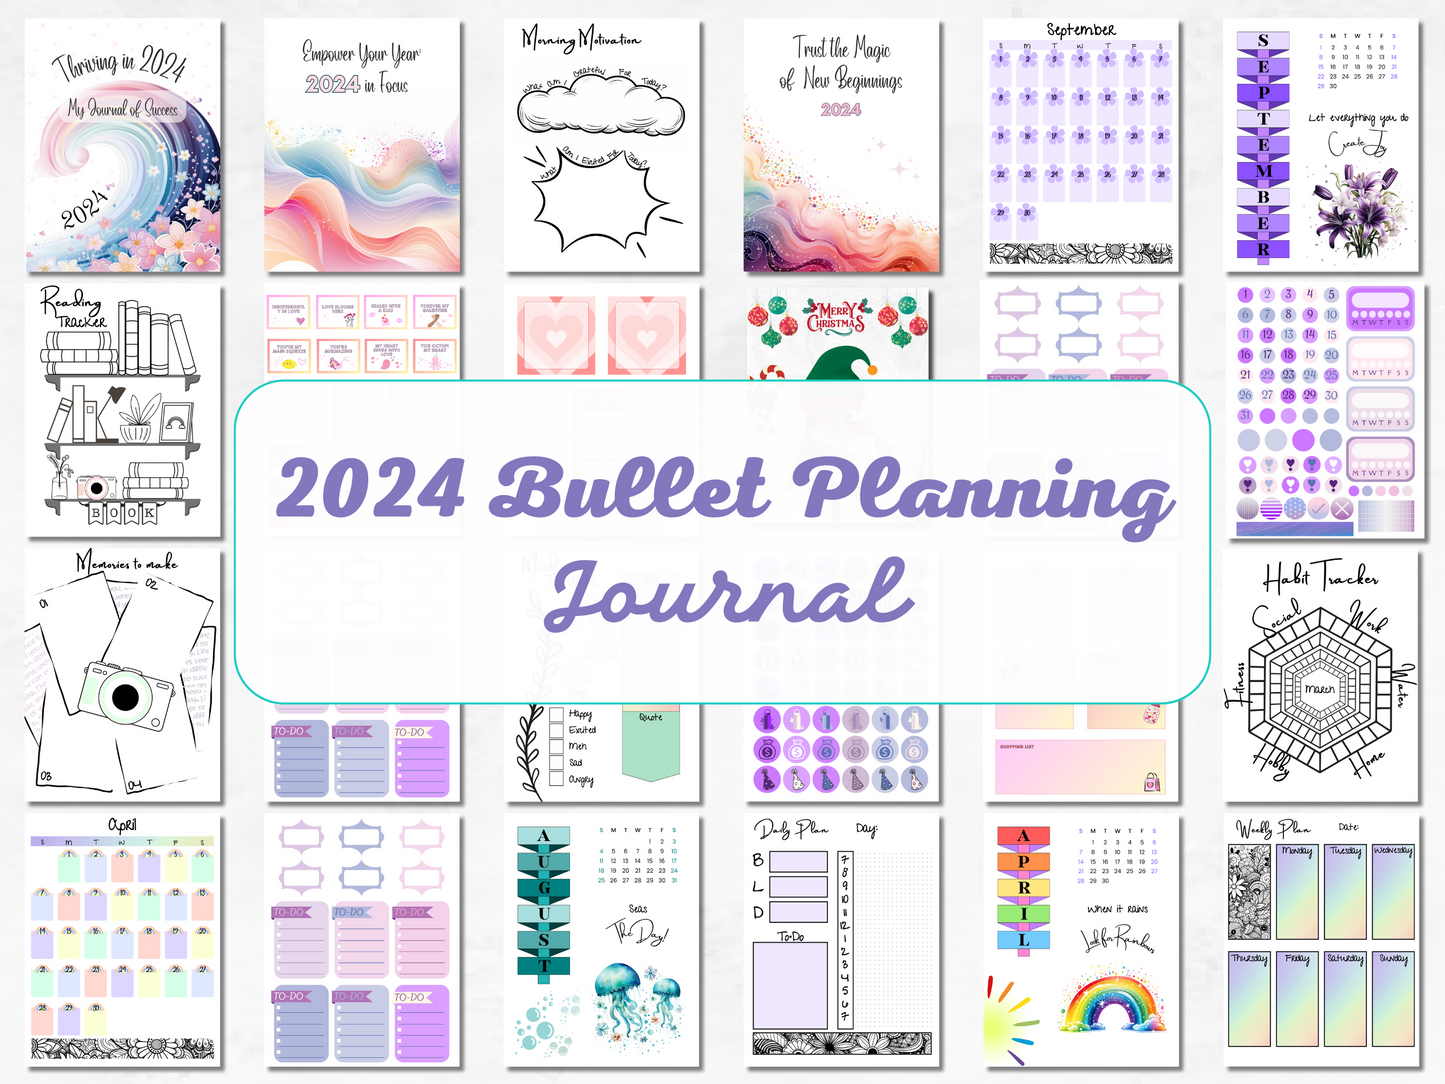 Bullet Journal Planning Journal printaable journal for the year, 